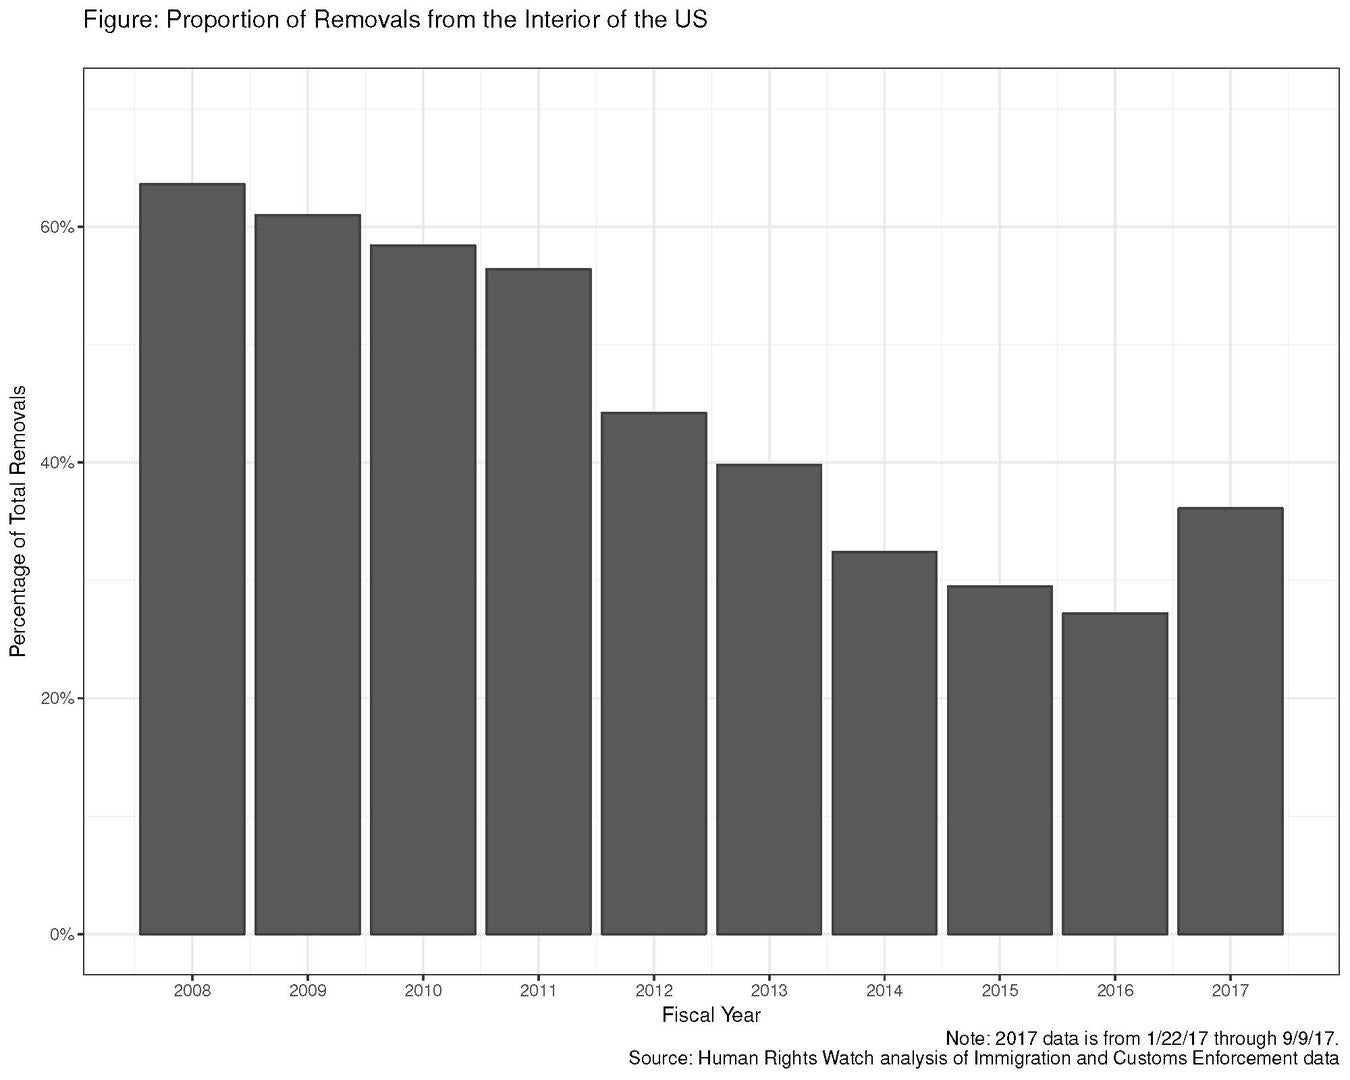 Proportion of removals from the interior of the US.